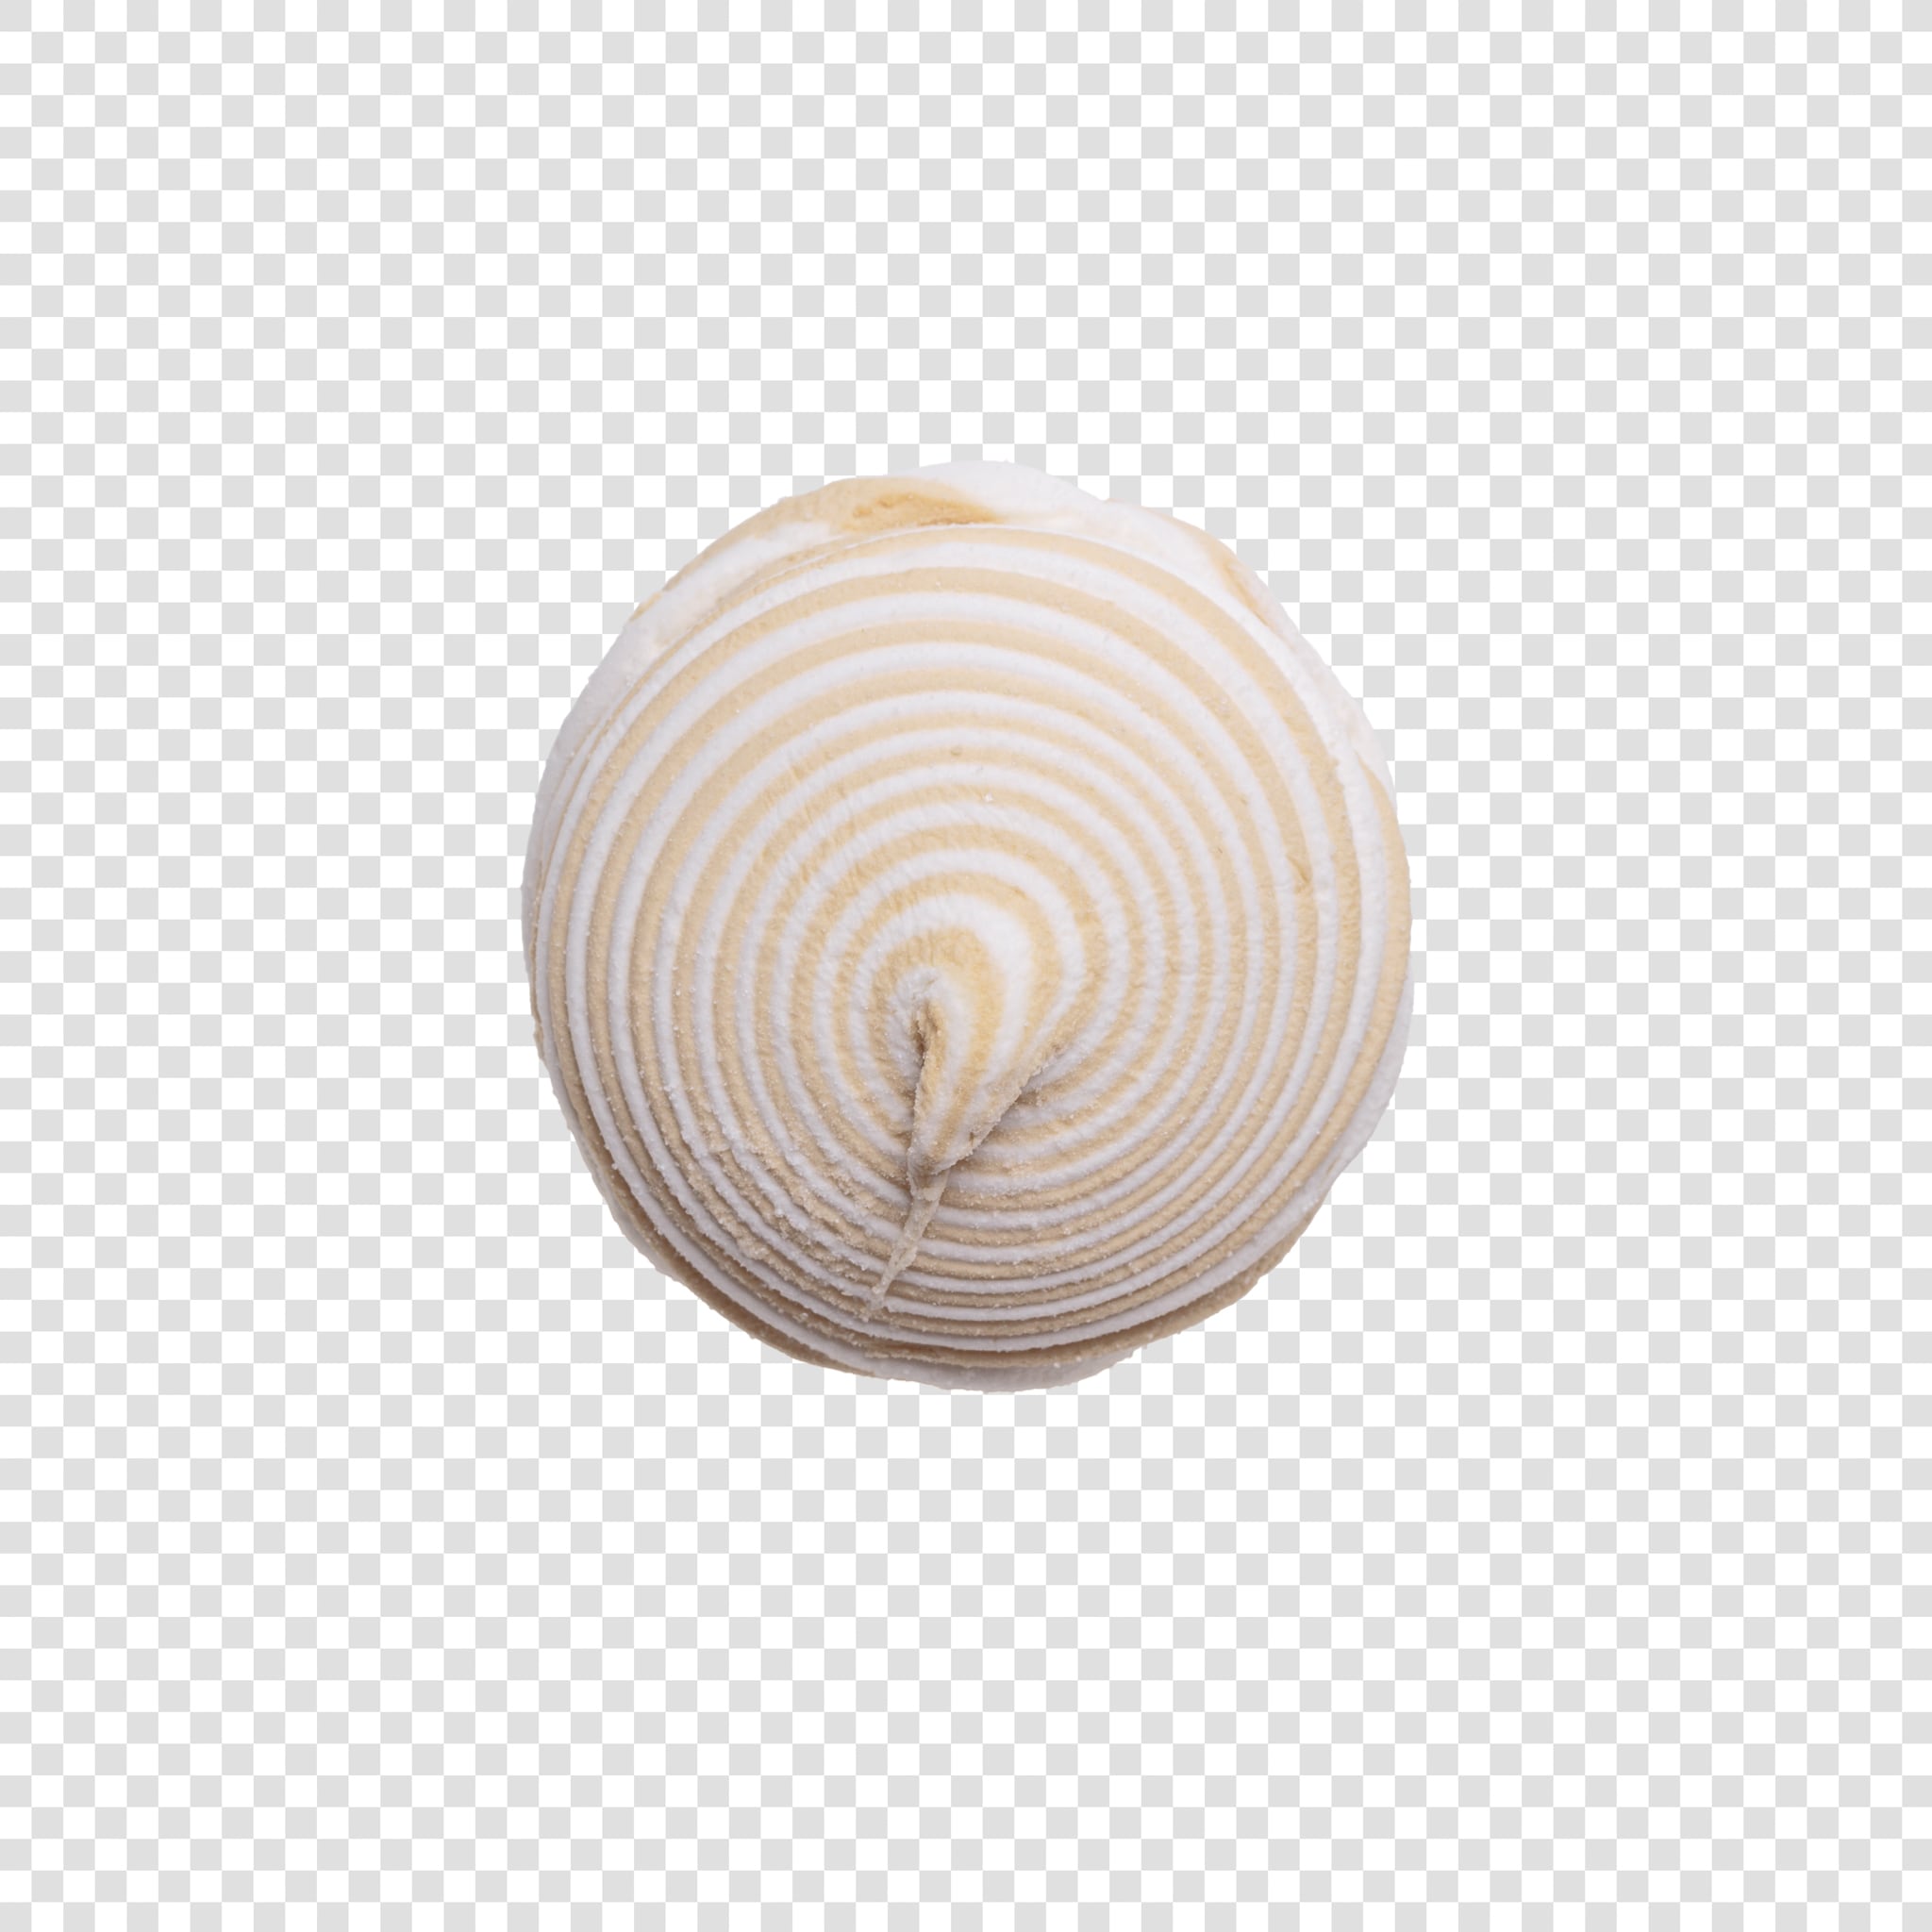 Marshmallow image with transparent background